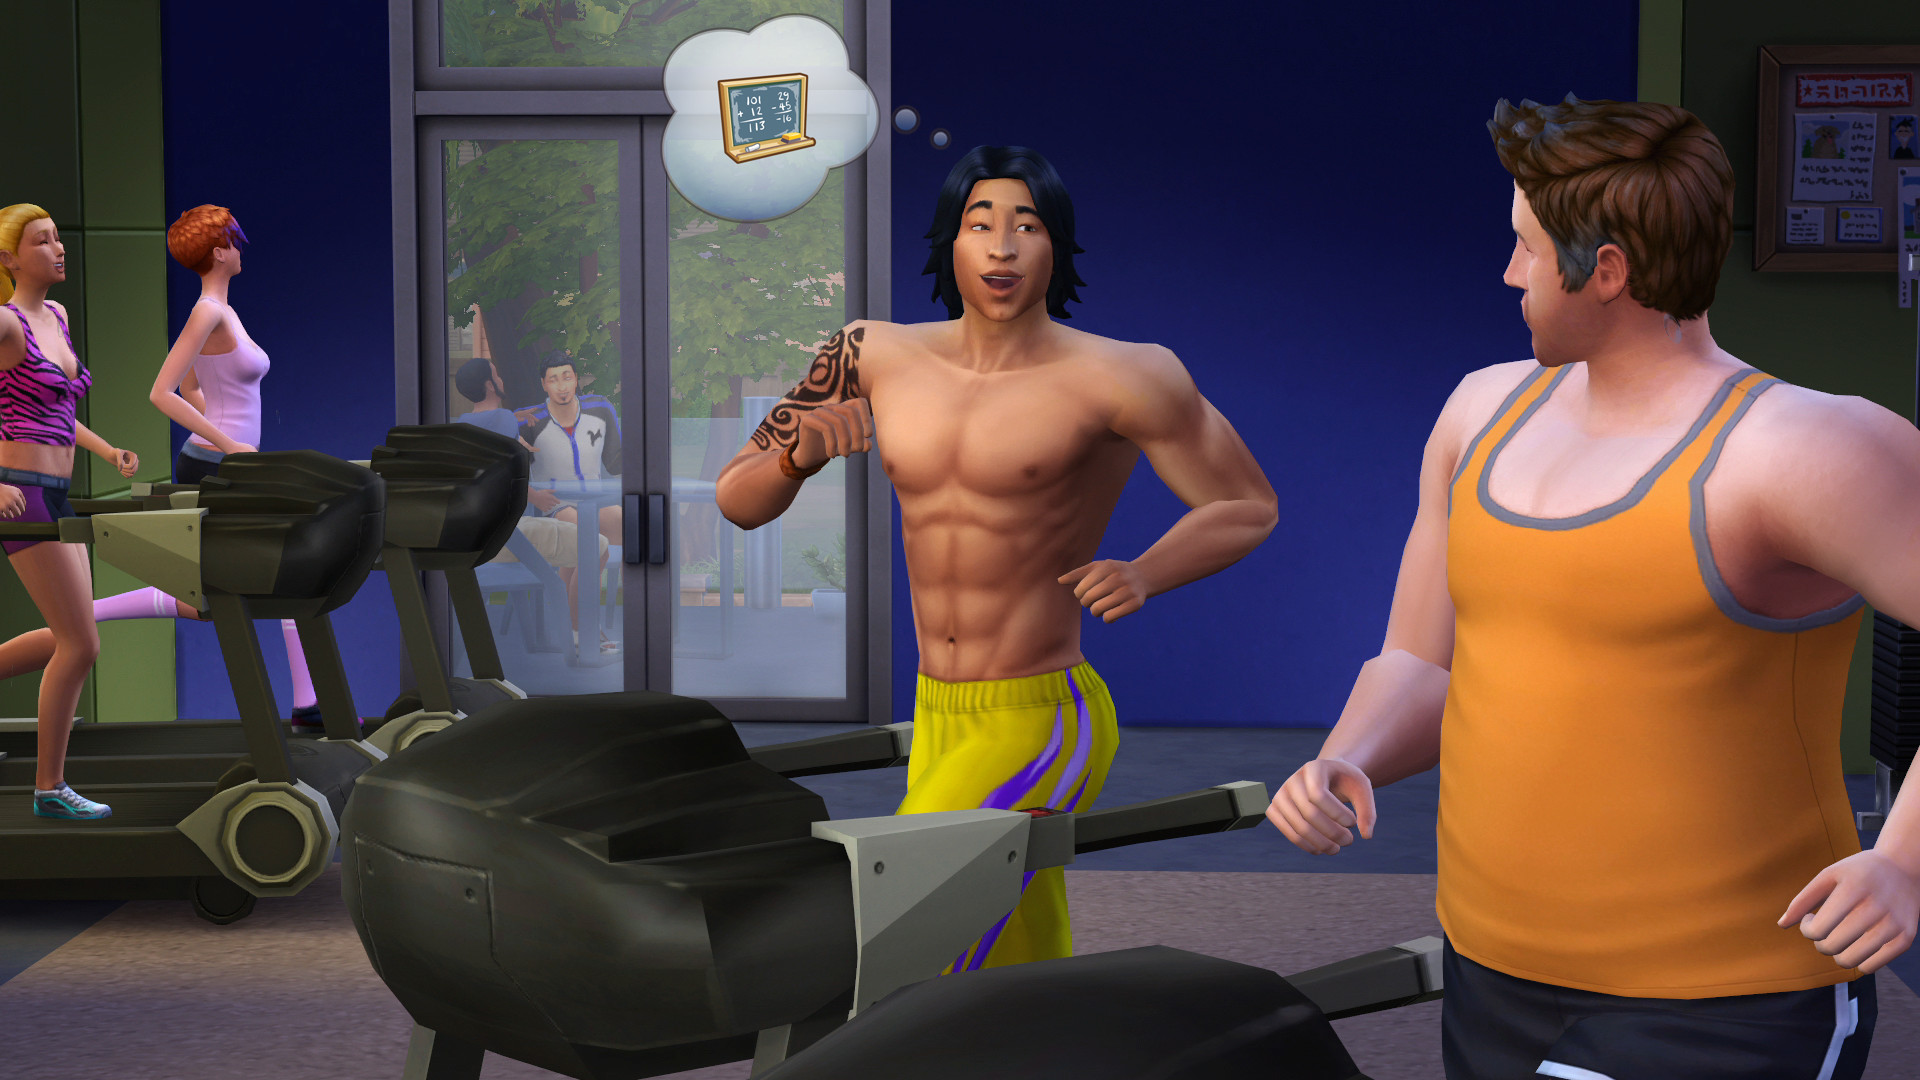 Save 40% on The Sims™ 4 Fitness Stuff on Steam